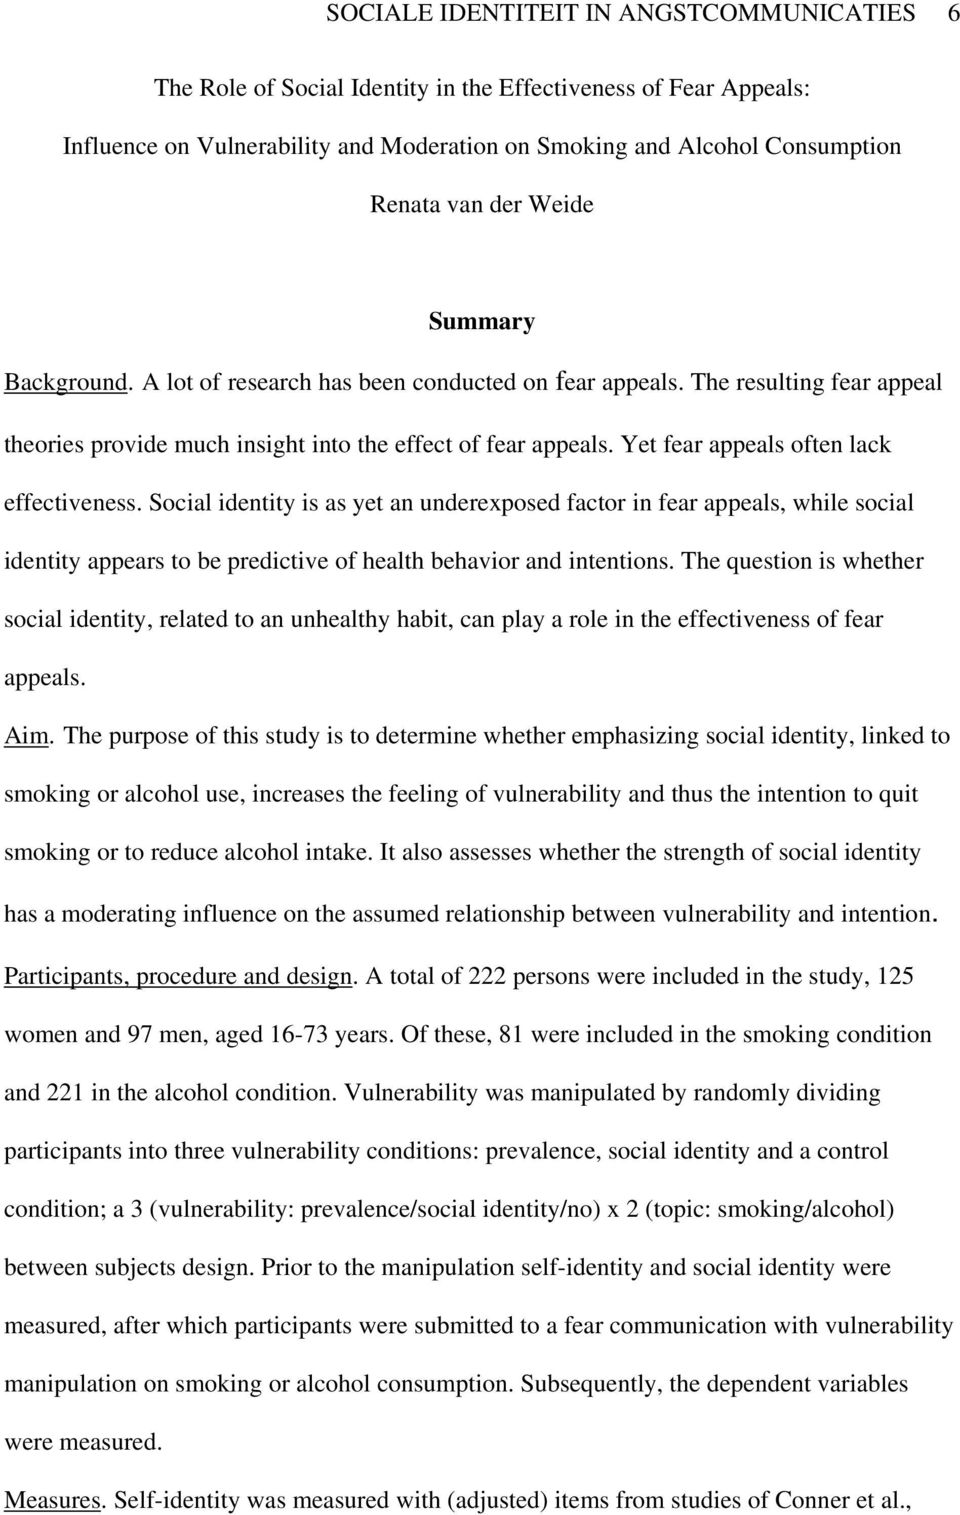 Yet fear appeals often lack effectiveness. Social identity is as yet an underexposed factor in fear appeals, while social identity appears to be predictive of health behavior and intentions.